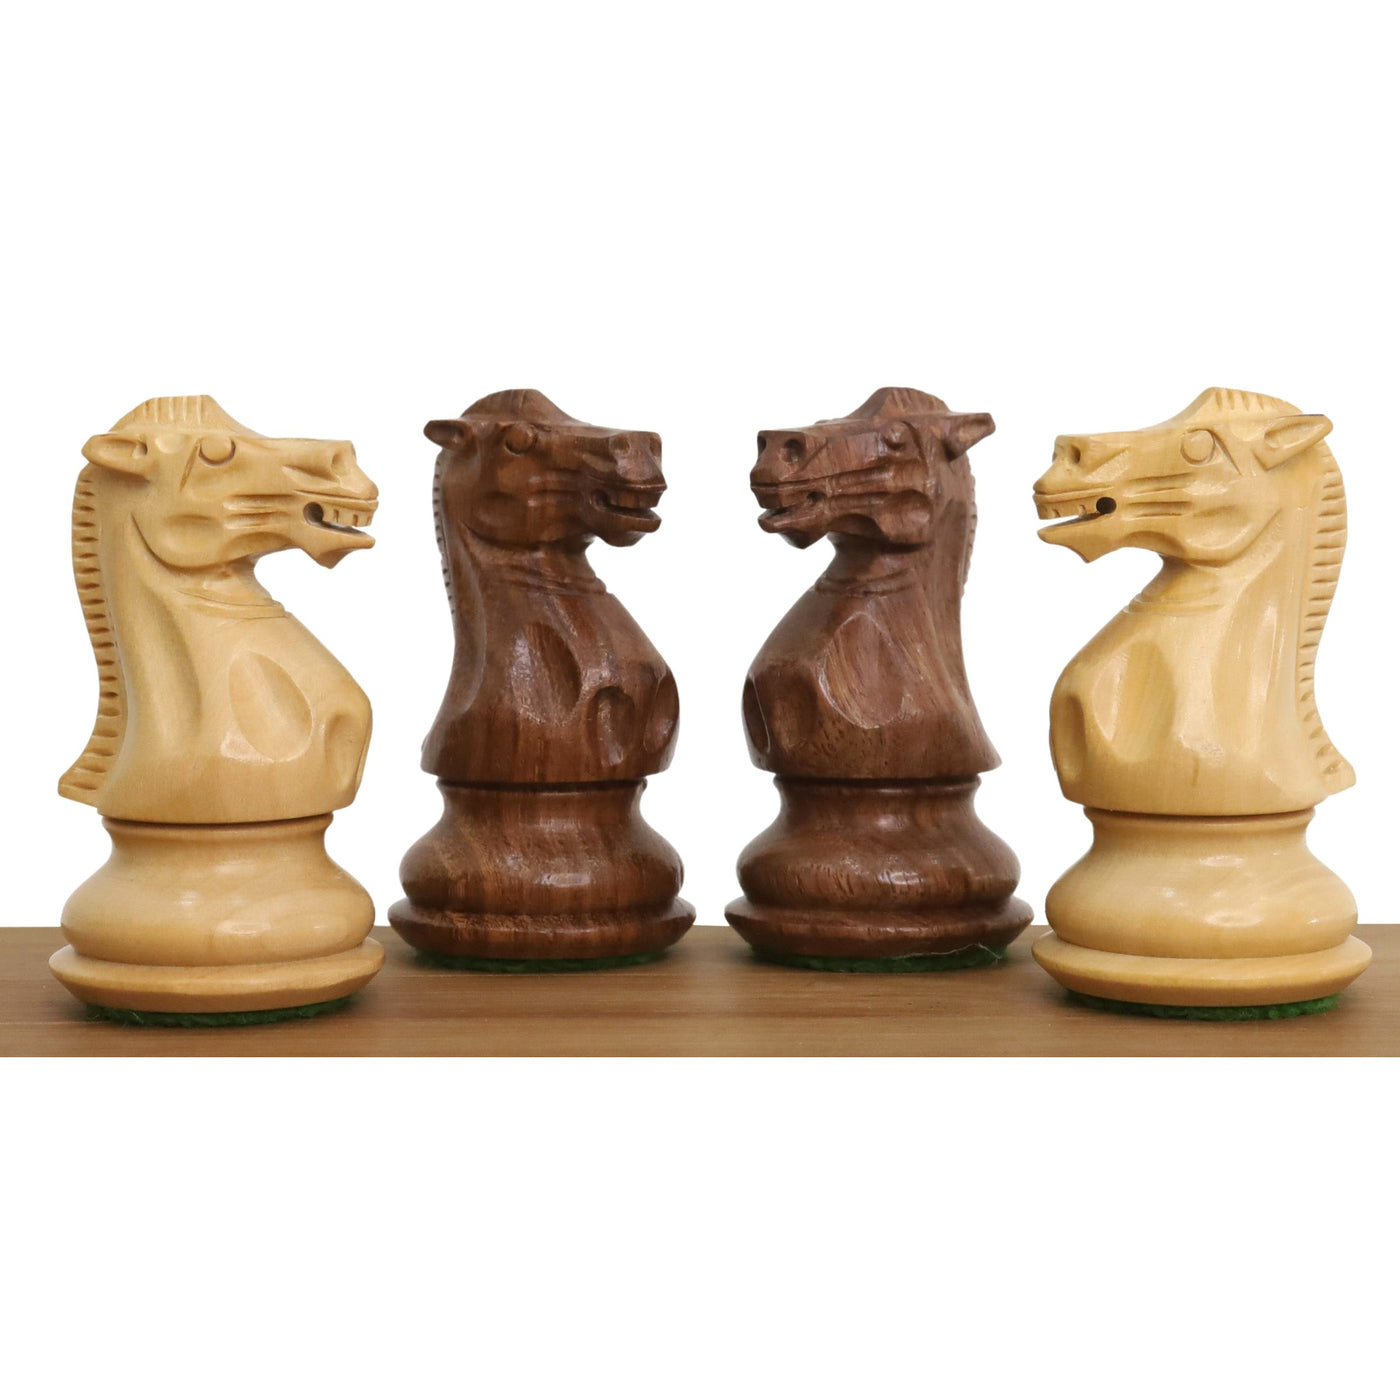 3" Professional Staunton Chess Set - Chess Pieces Only- Weighted Golden Rosewood